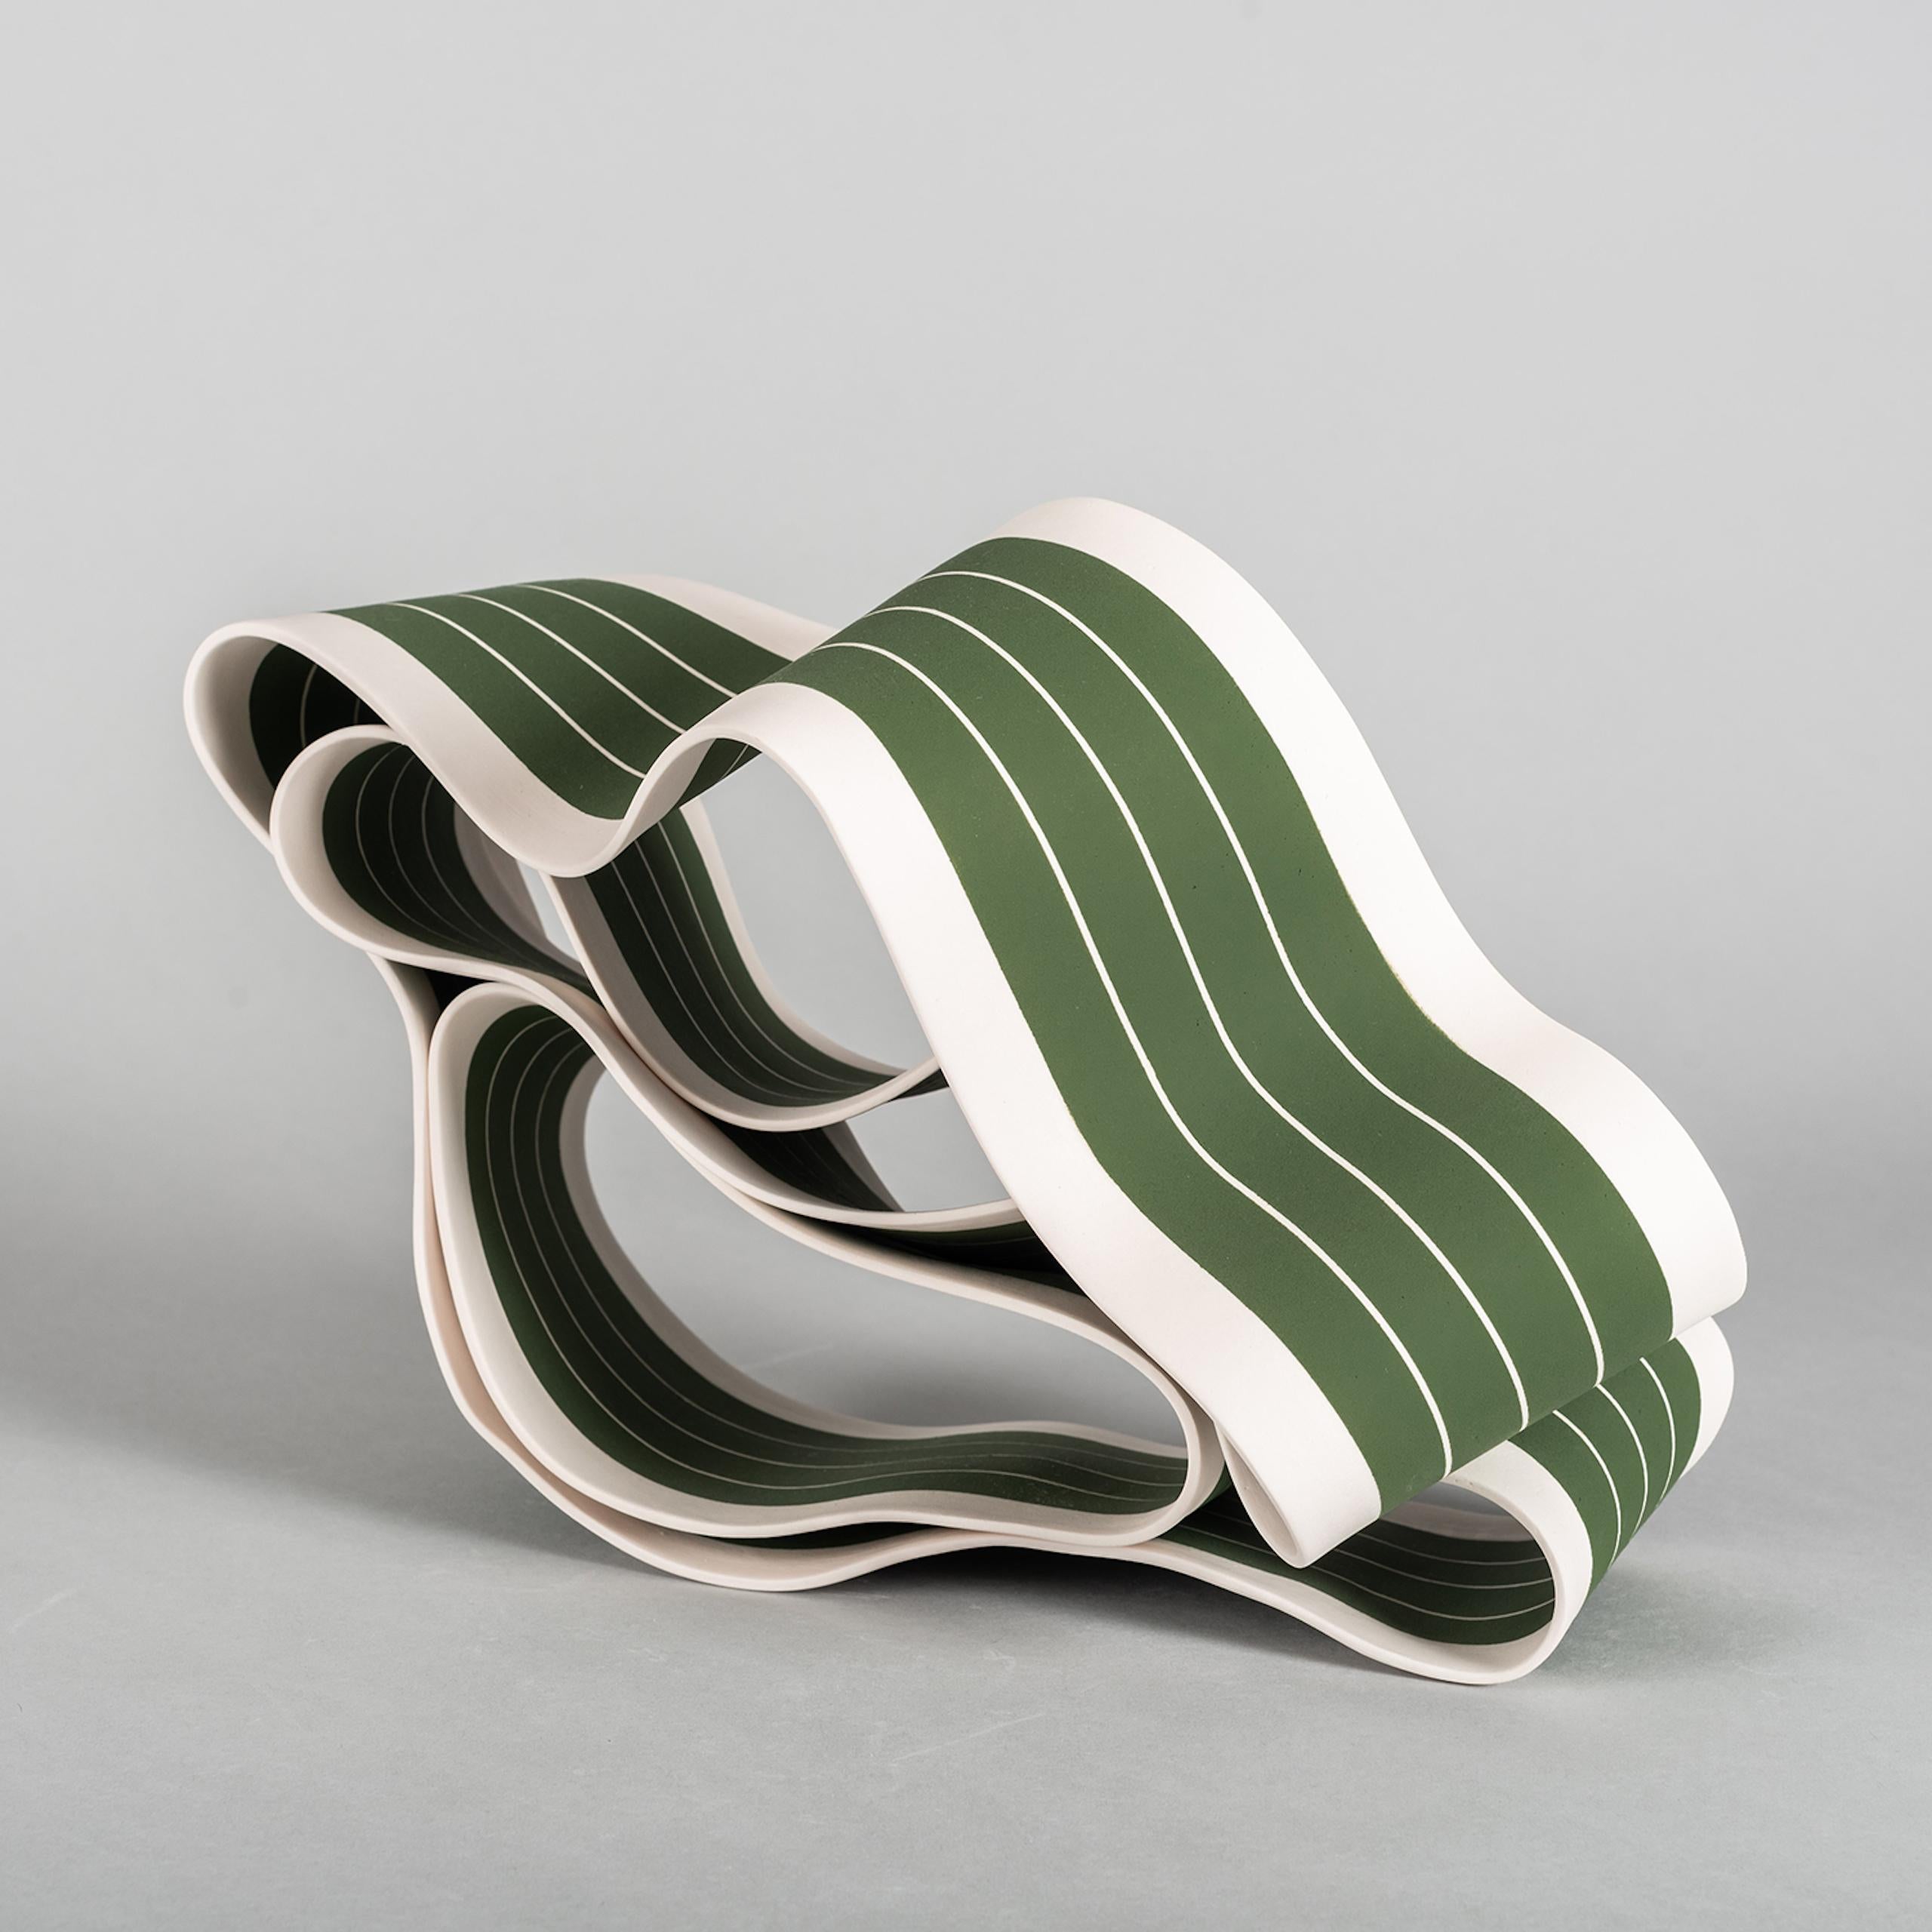 Folding in Motion 4 by Simcha Even-Chen - Porcelain sculpture, green lines For Sale 2